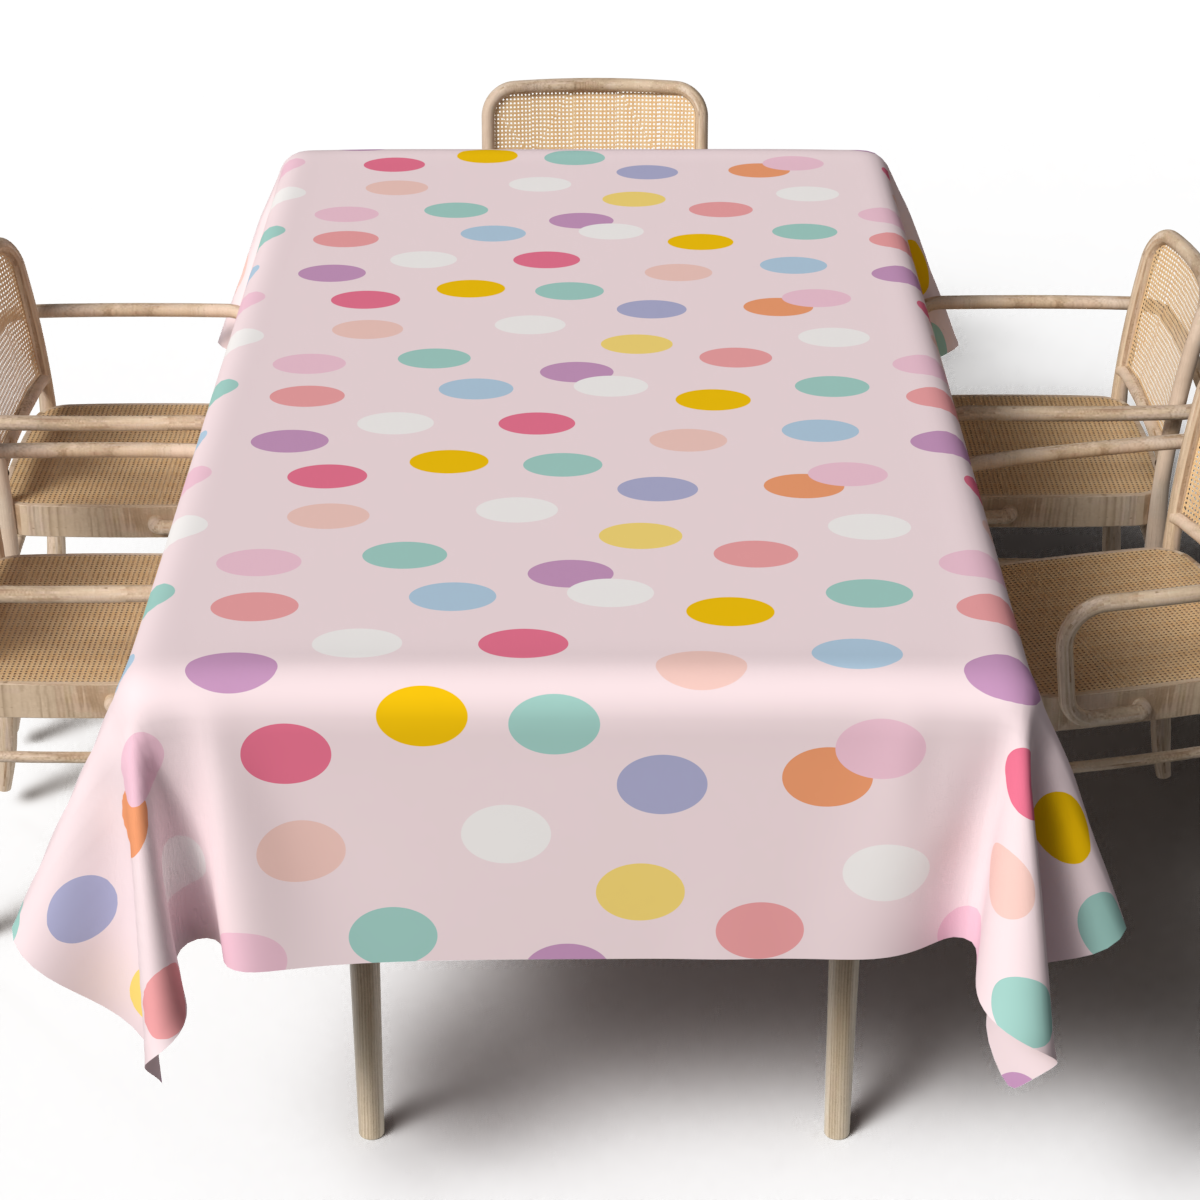 Party ˈBirthday Themedˈ Tablecloth